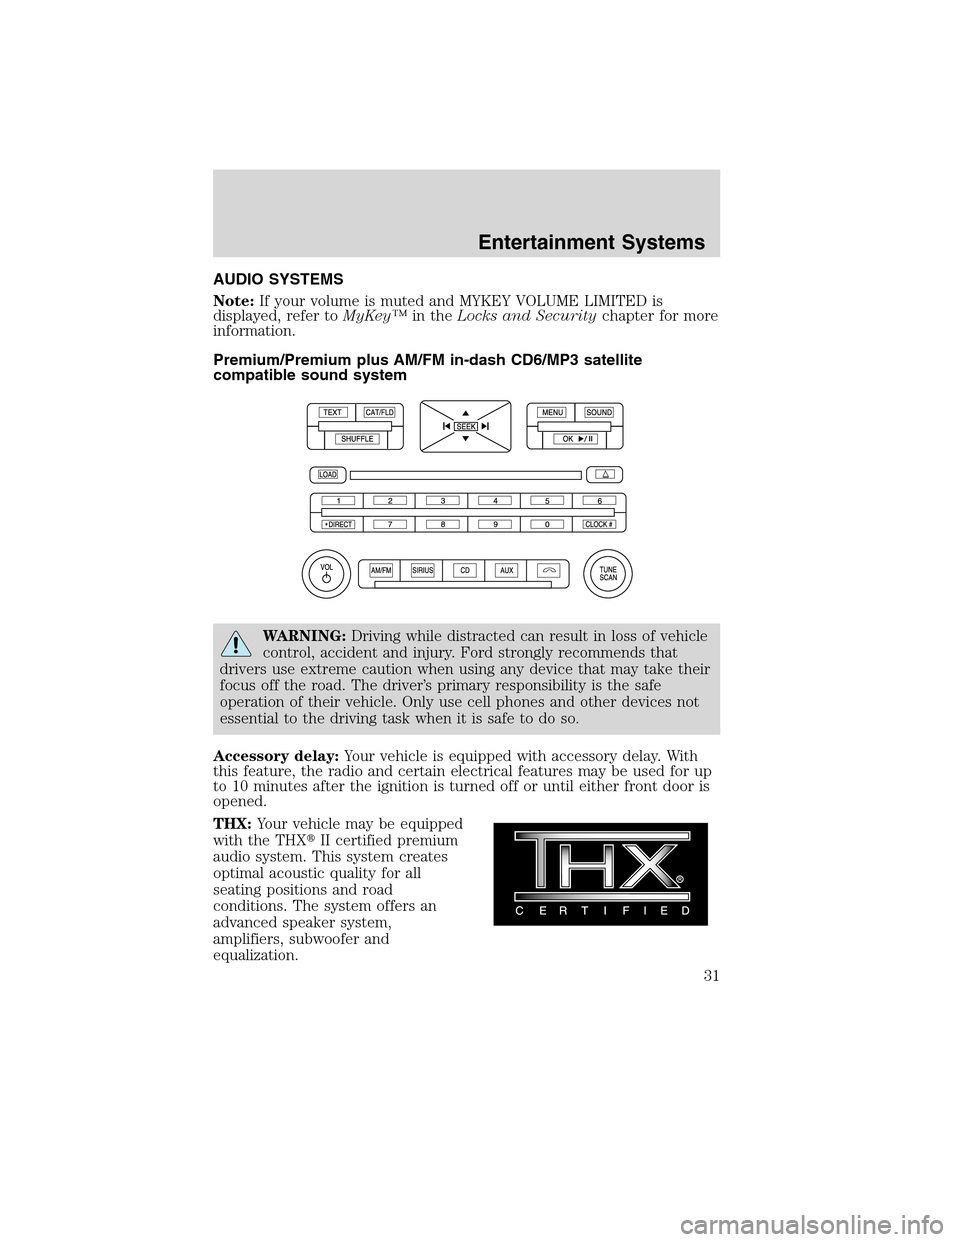 LINCOLN MKS 2010 User Guide AUDIO SYSTEMS
Note:If your volume is muted and MYKEY VOLUME LIMITED is
displayed, refer toMyKey™in theLocks and Securitychapter for more
information.
Premium/Premium plus AM/FM in-dash CD6/MP3 satel